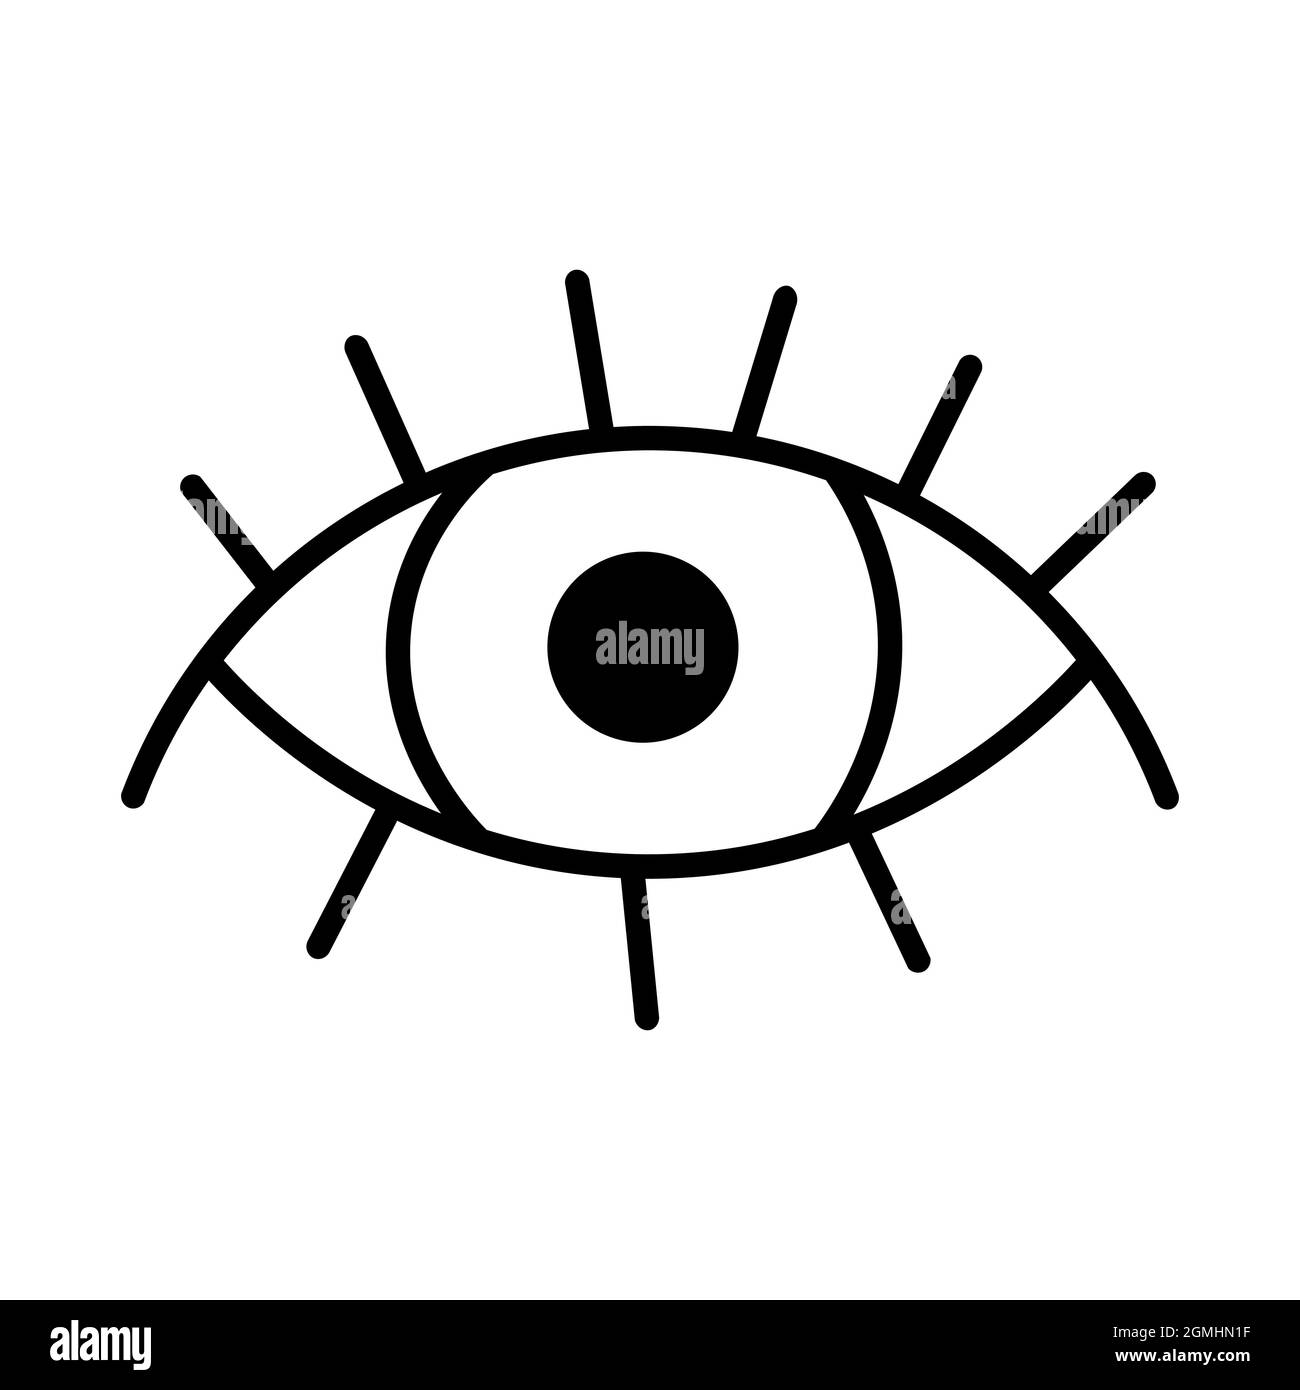 https://c8.alamy.com/comp/2GMHN1F/eye-icon-simple-line-style-for-web-postcard-poster-design-vector-illustration-sing-doodle-human-eye-open-isolated-on-white-background-business-2GMHN1F.jpg